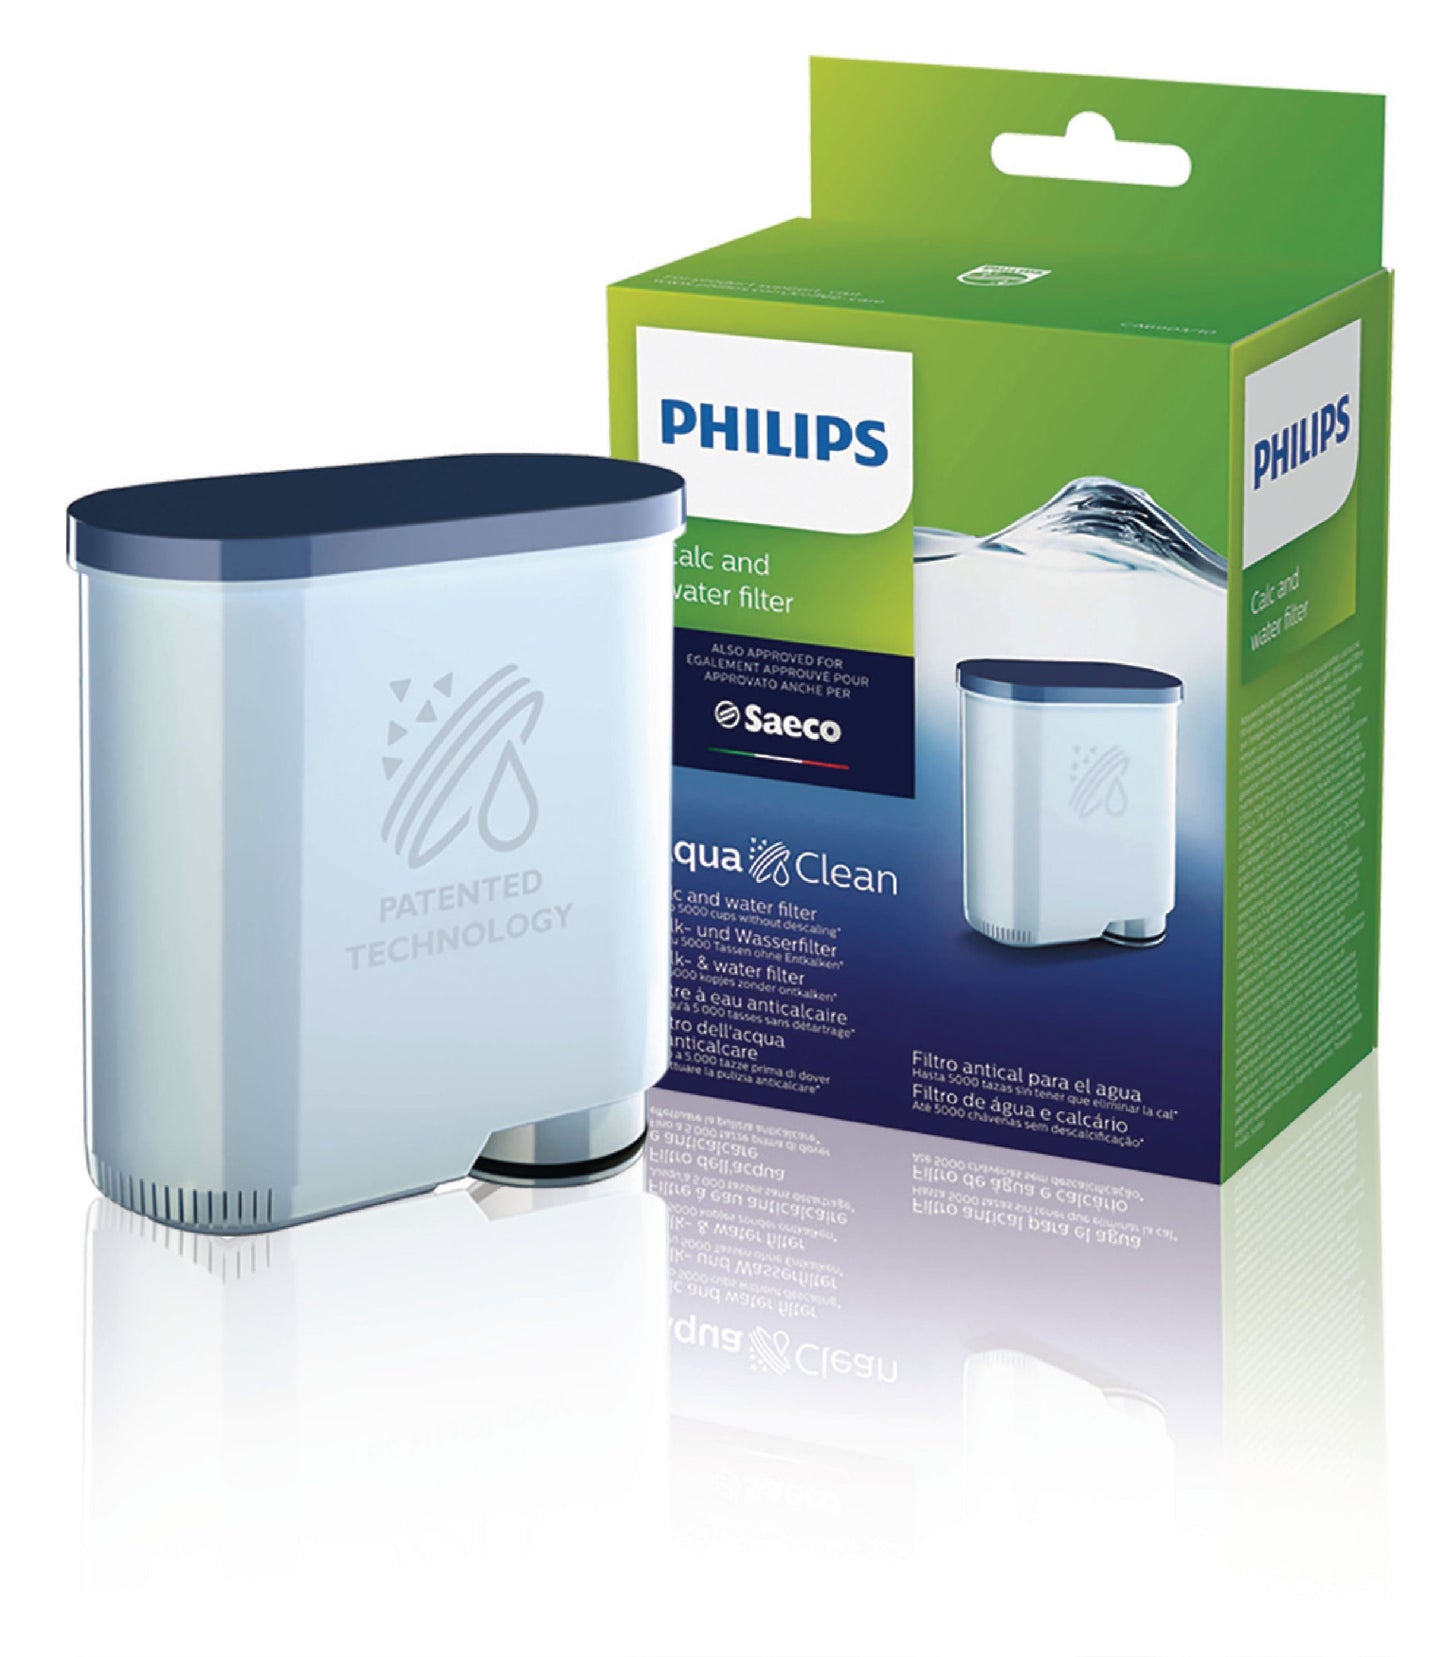 Philips CA6903/10 Limescale and Water Filter for Saeco Espresso Machine